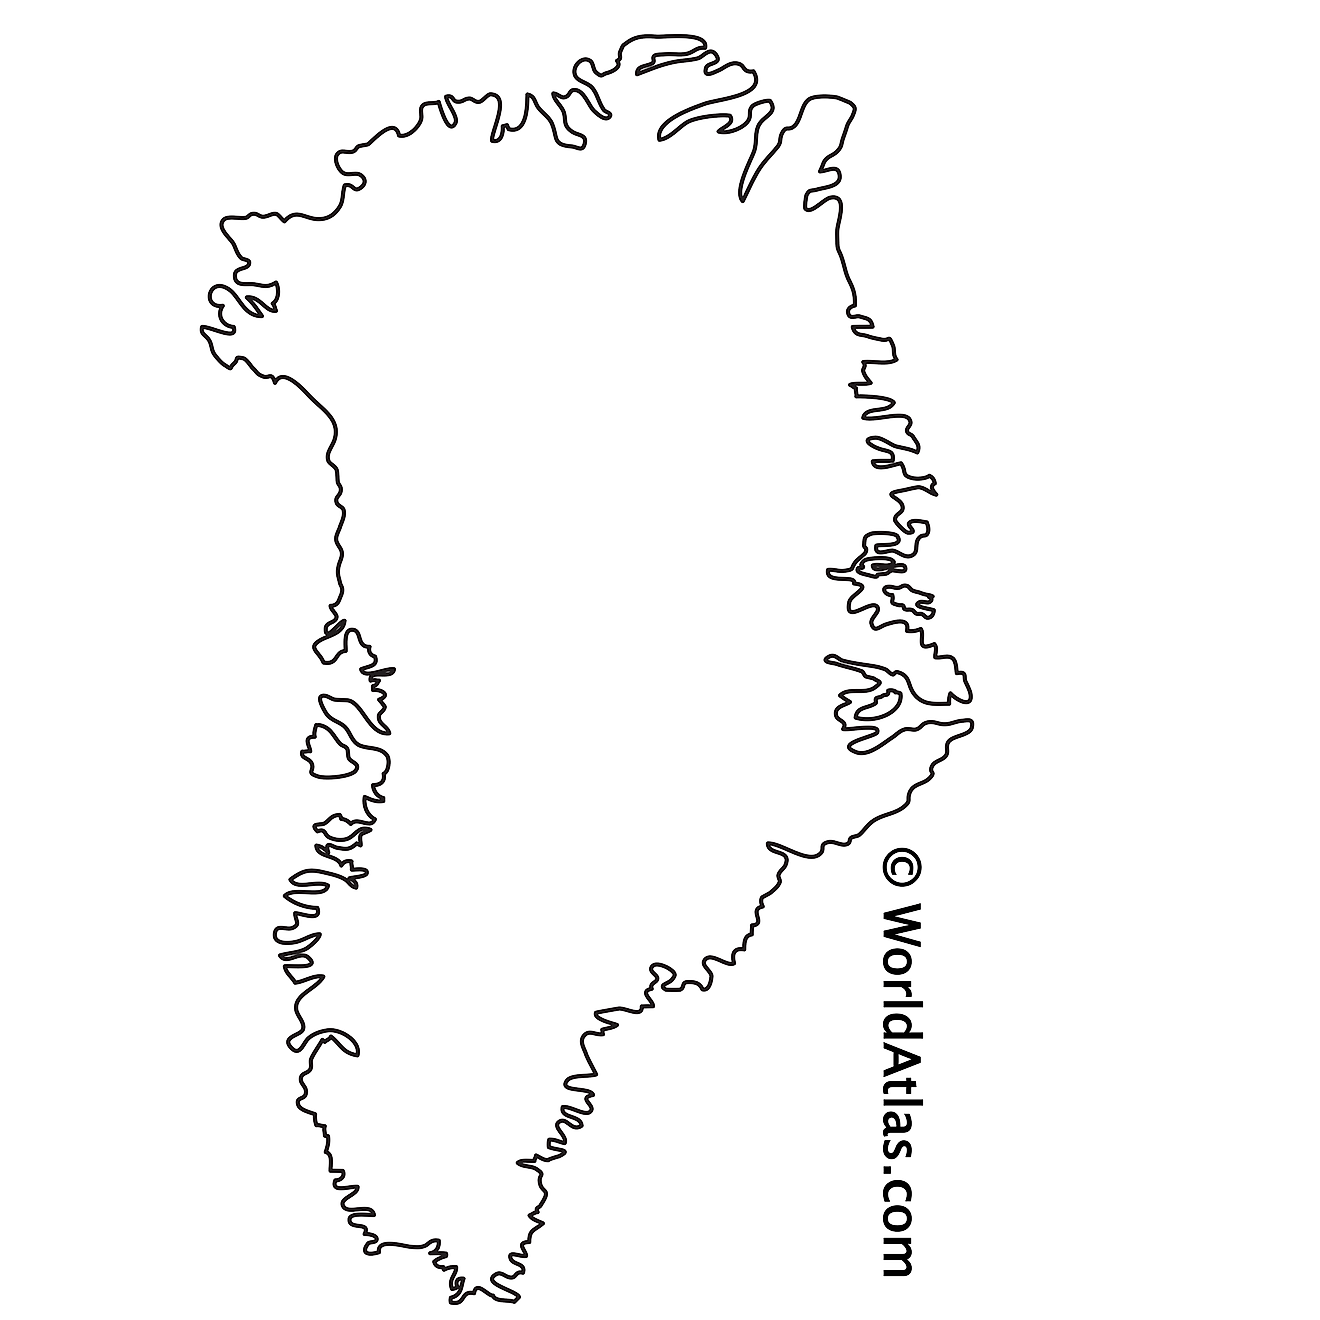 Blank outline map of Greenland